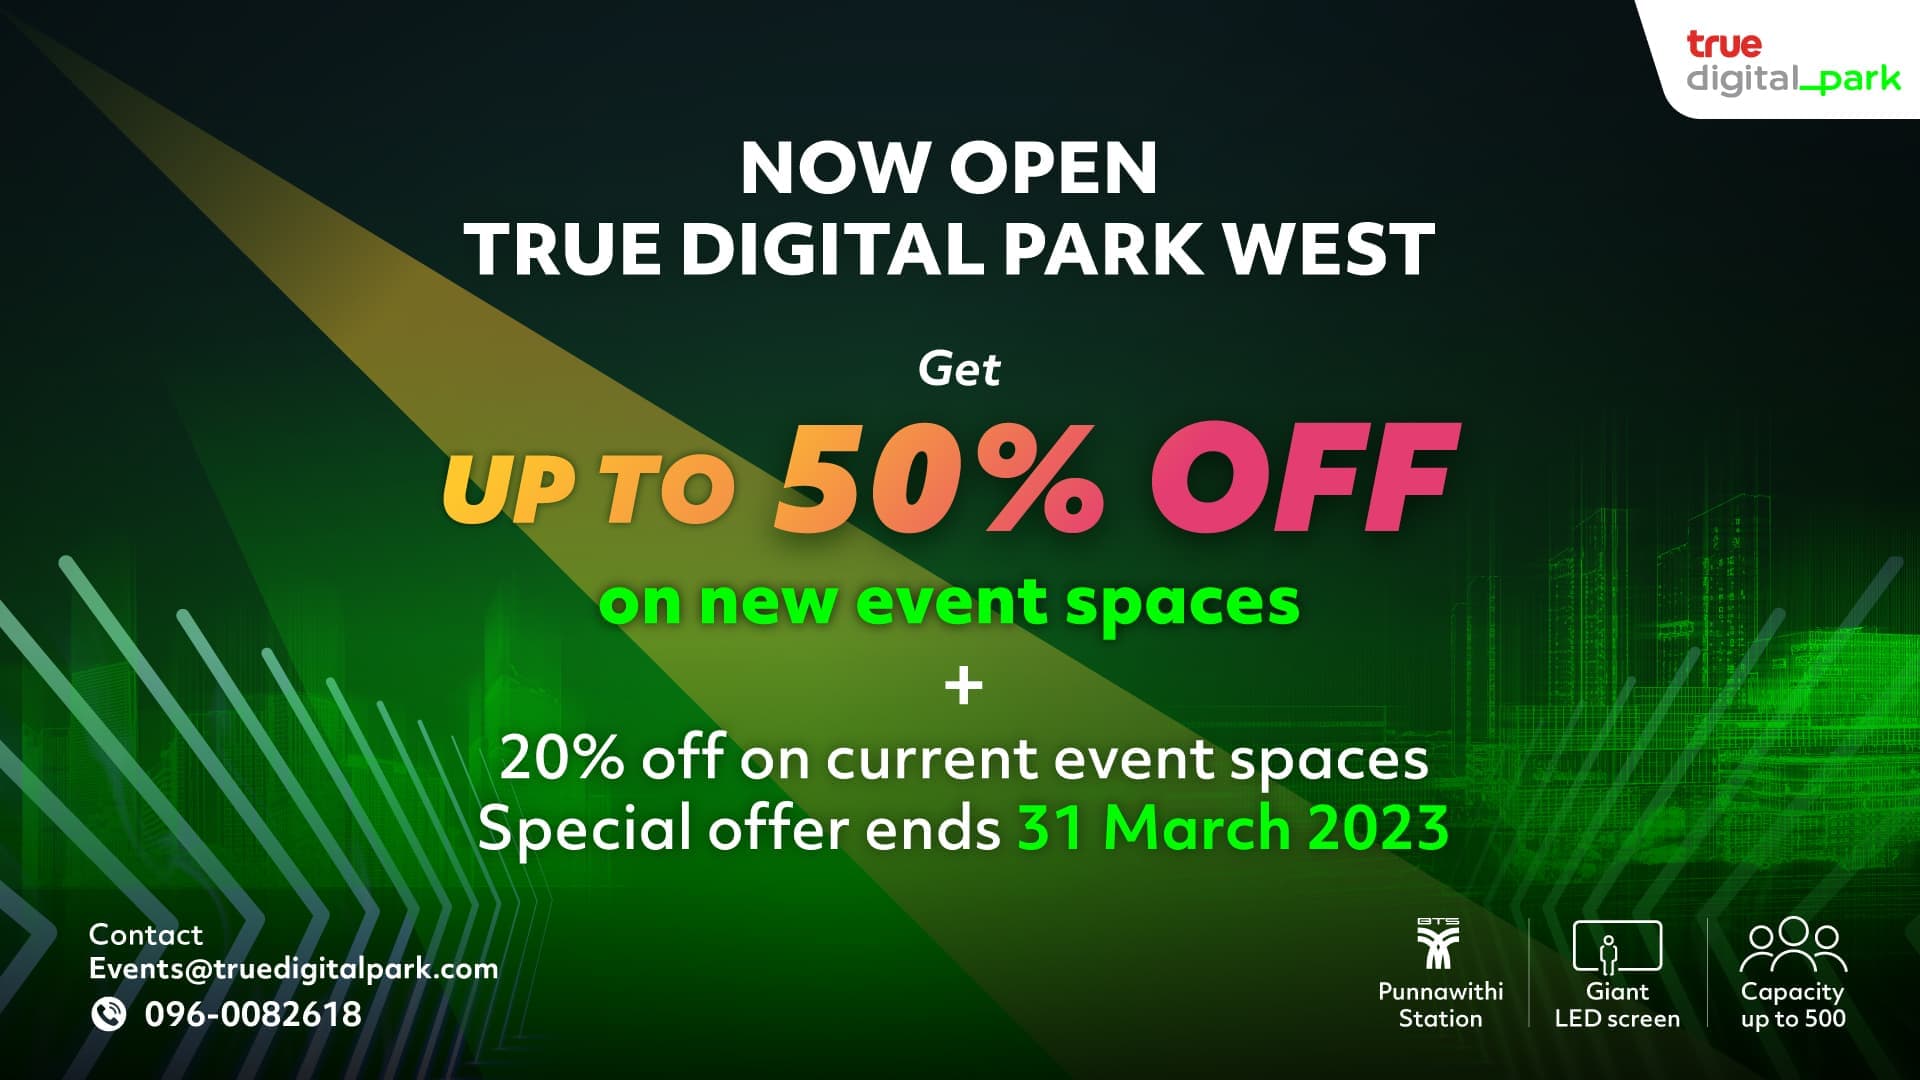 Celebrating launch of new development, get up to 50% off event space rentals at TDPK West